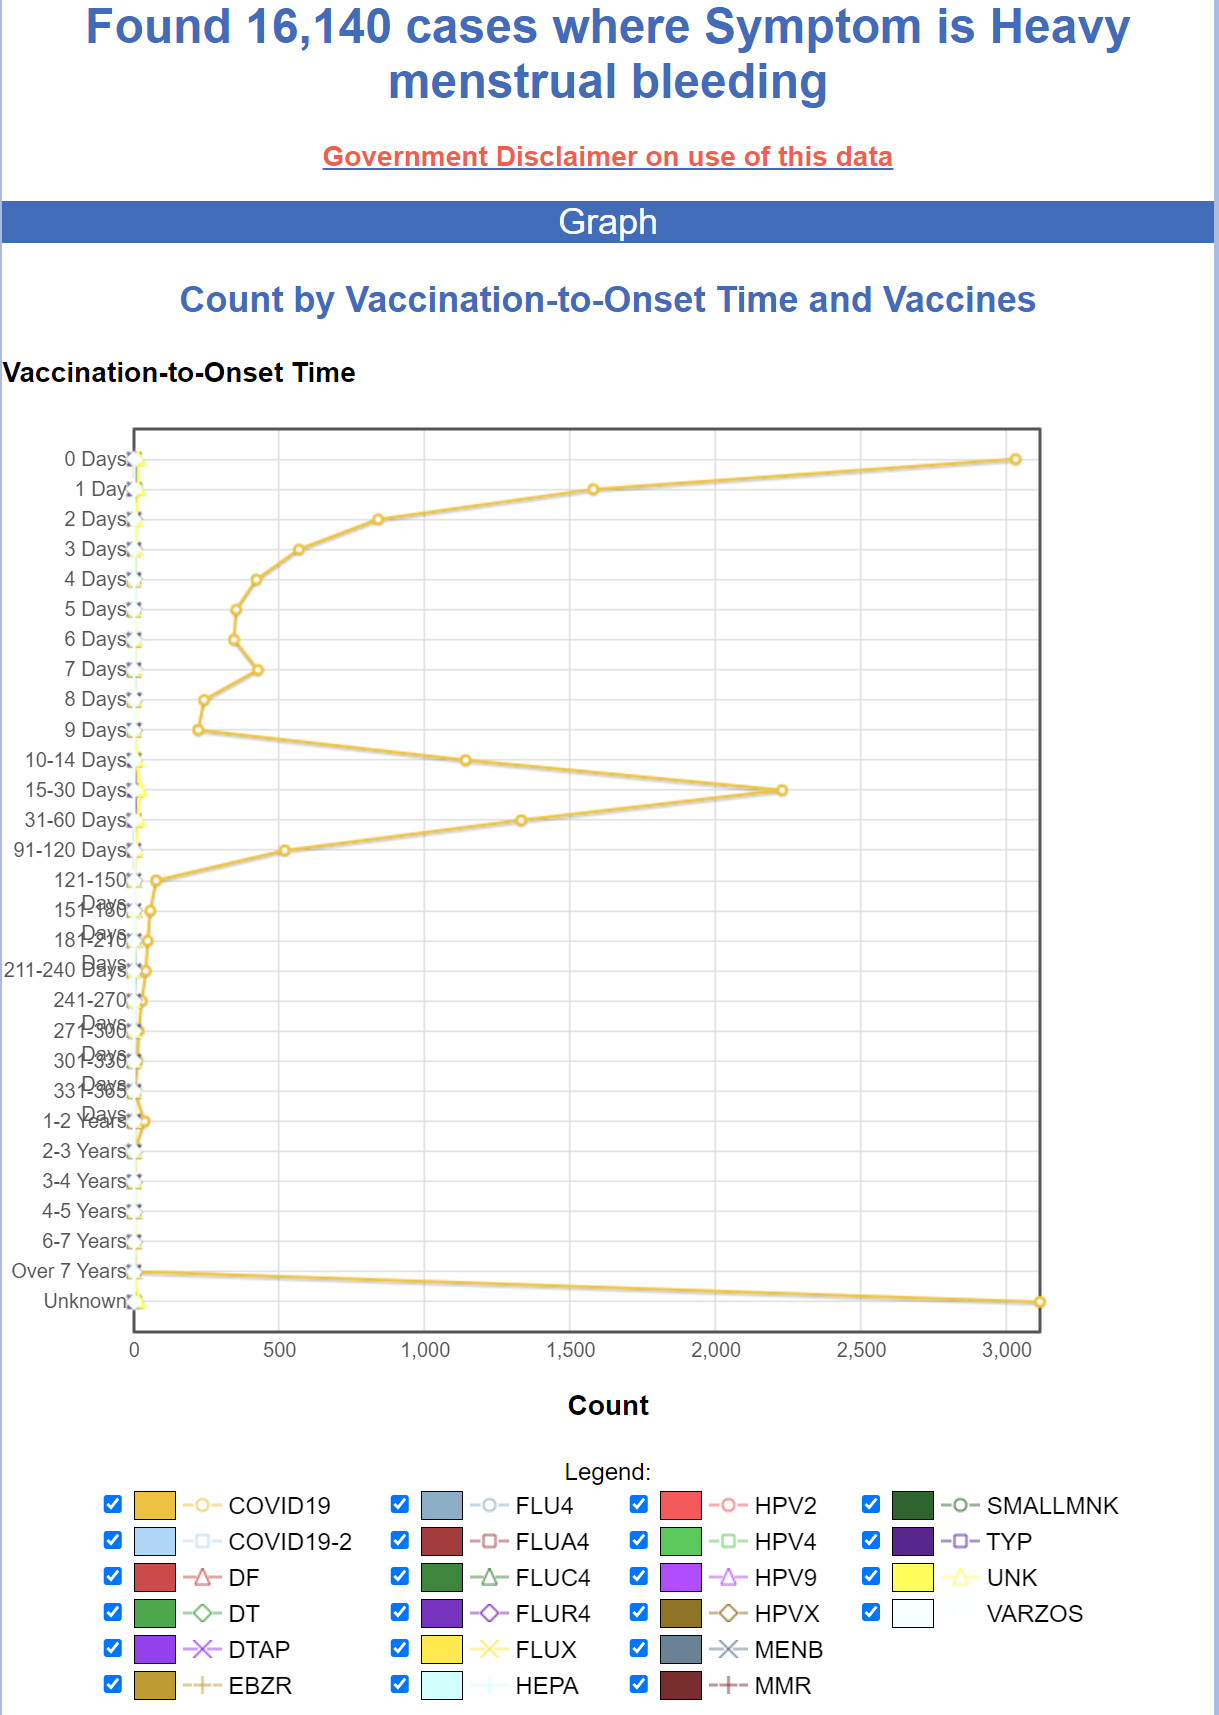 Is the CDC totally blind to all the adverse events from the COVID vaccines? Https%3A%2F%2Fsubstack-post-media.s3.amazonaws.com%2Fpublic%2Fimages%2F343223d2-22b9-4060-959d-344acf615ac5_1219x1715